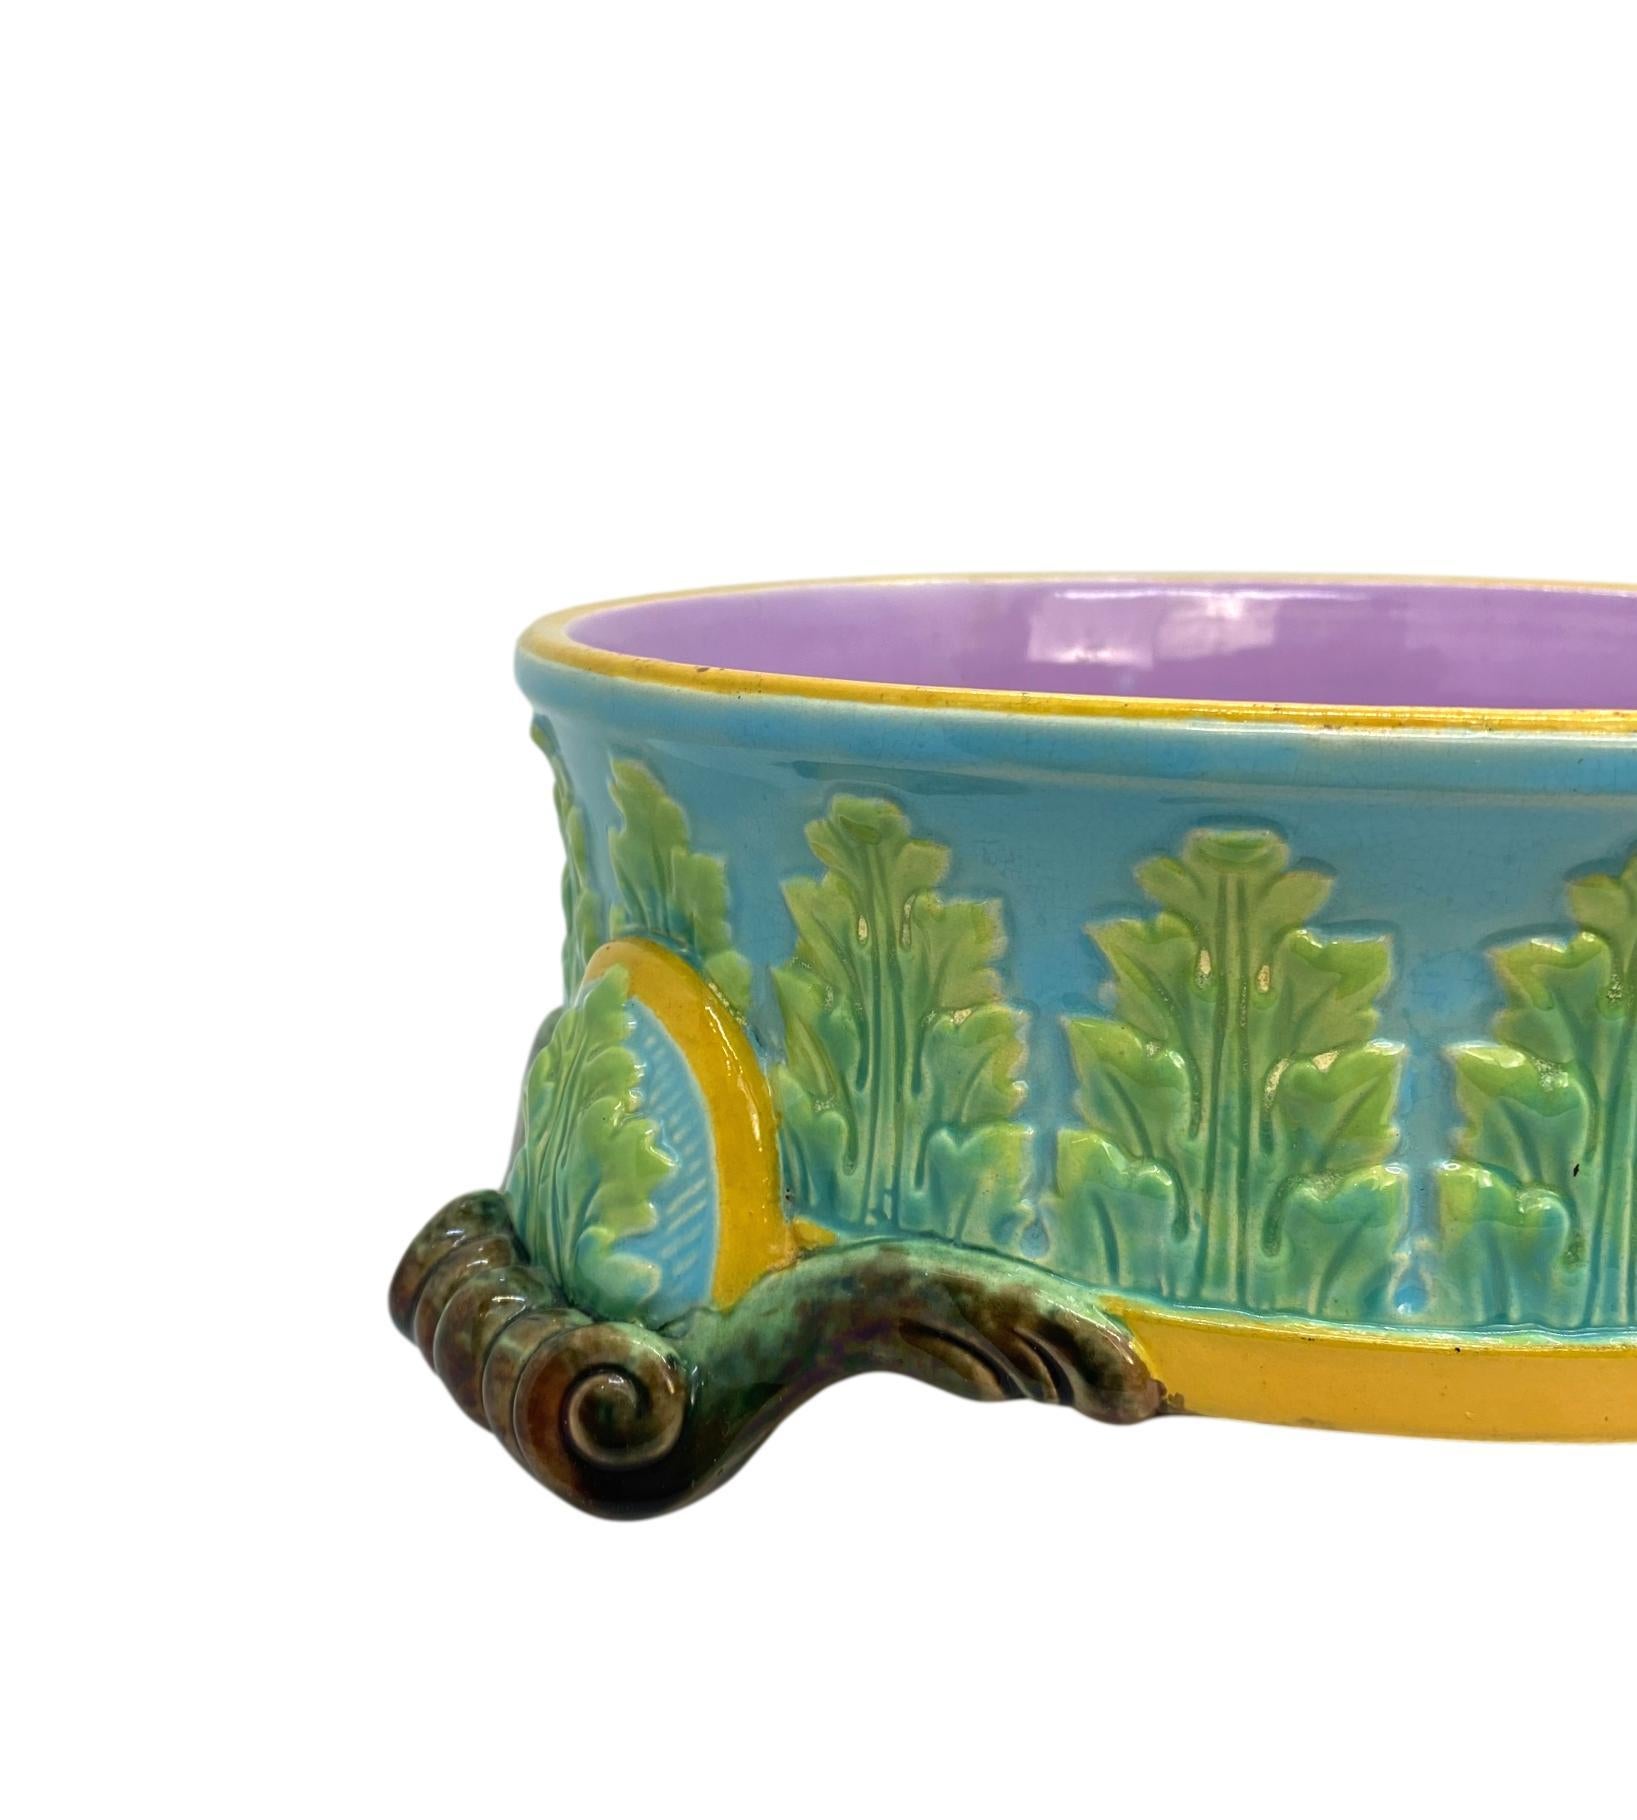 English George Jones Majolica Dog Bowl, Glazed in Turquoise, Pink Interior, Dated 1884